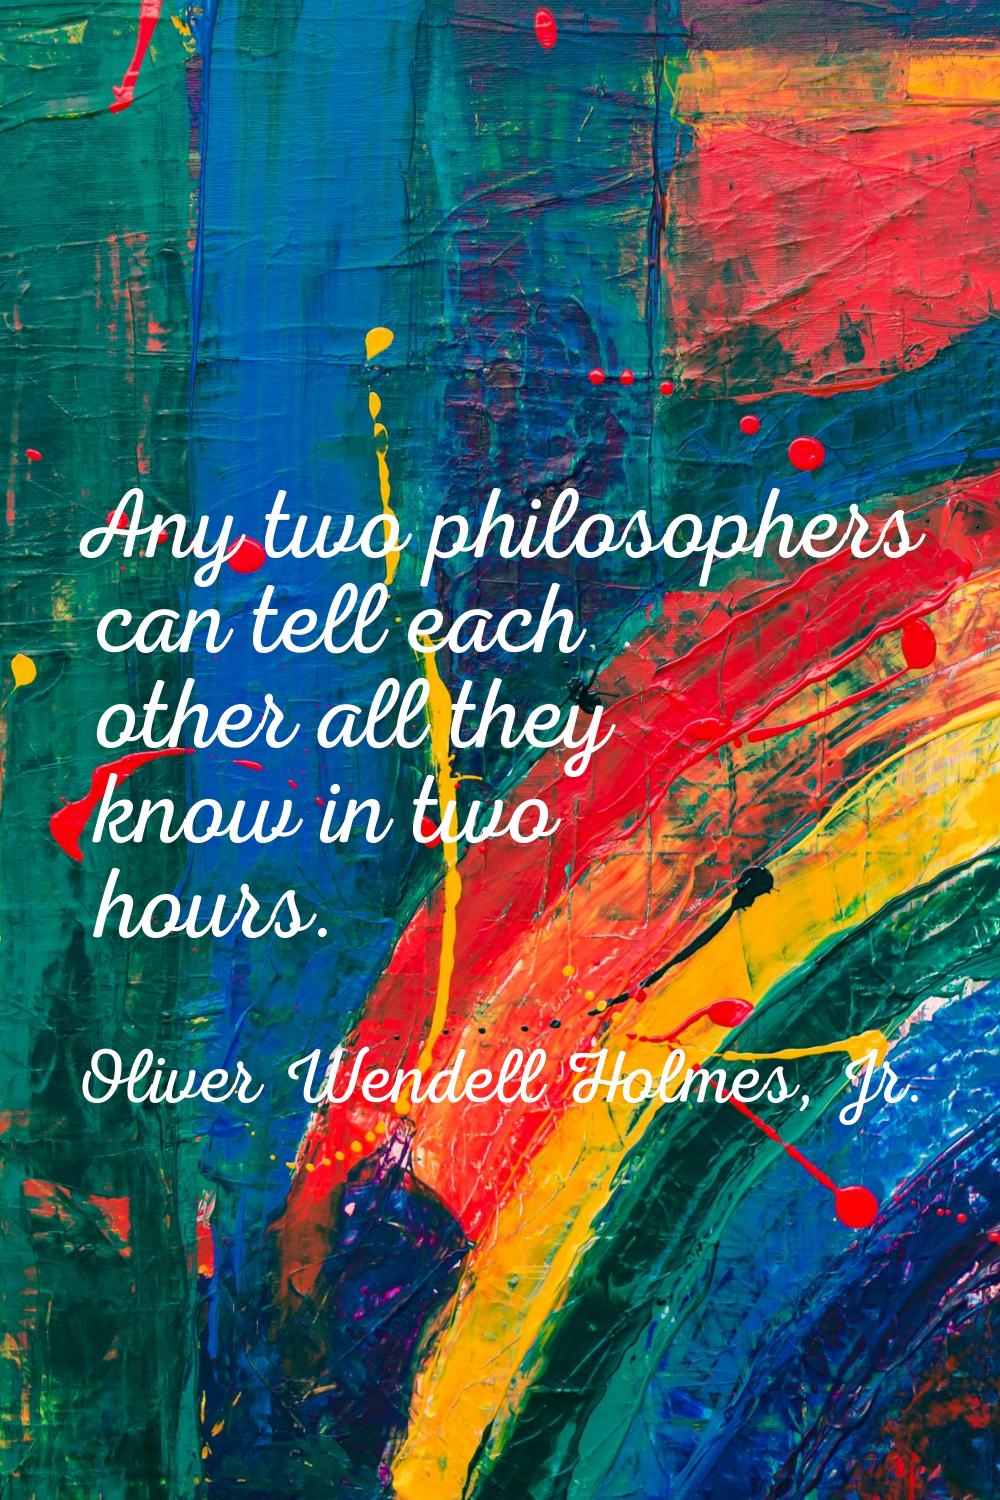 Any two philosophers can tell each other all they know in two hours.